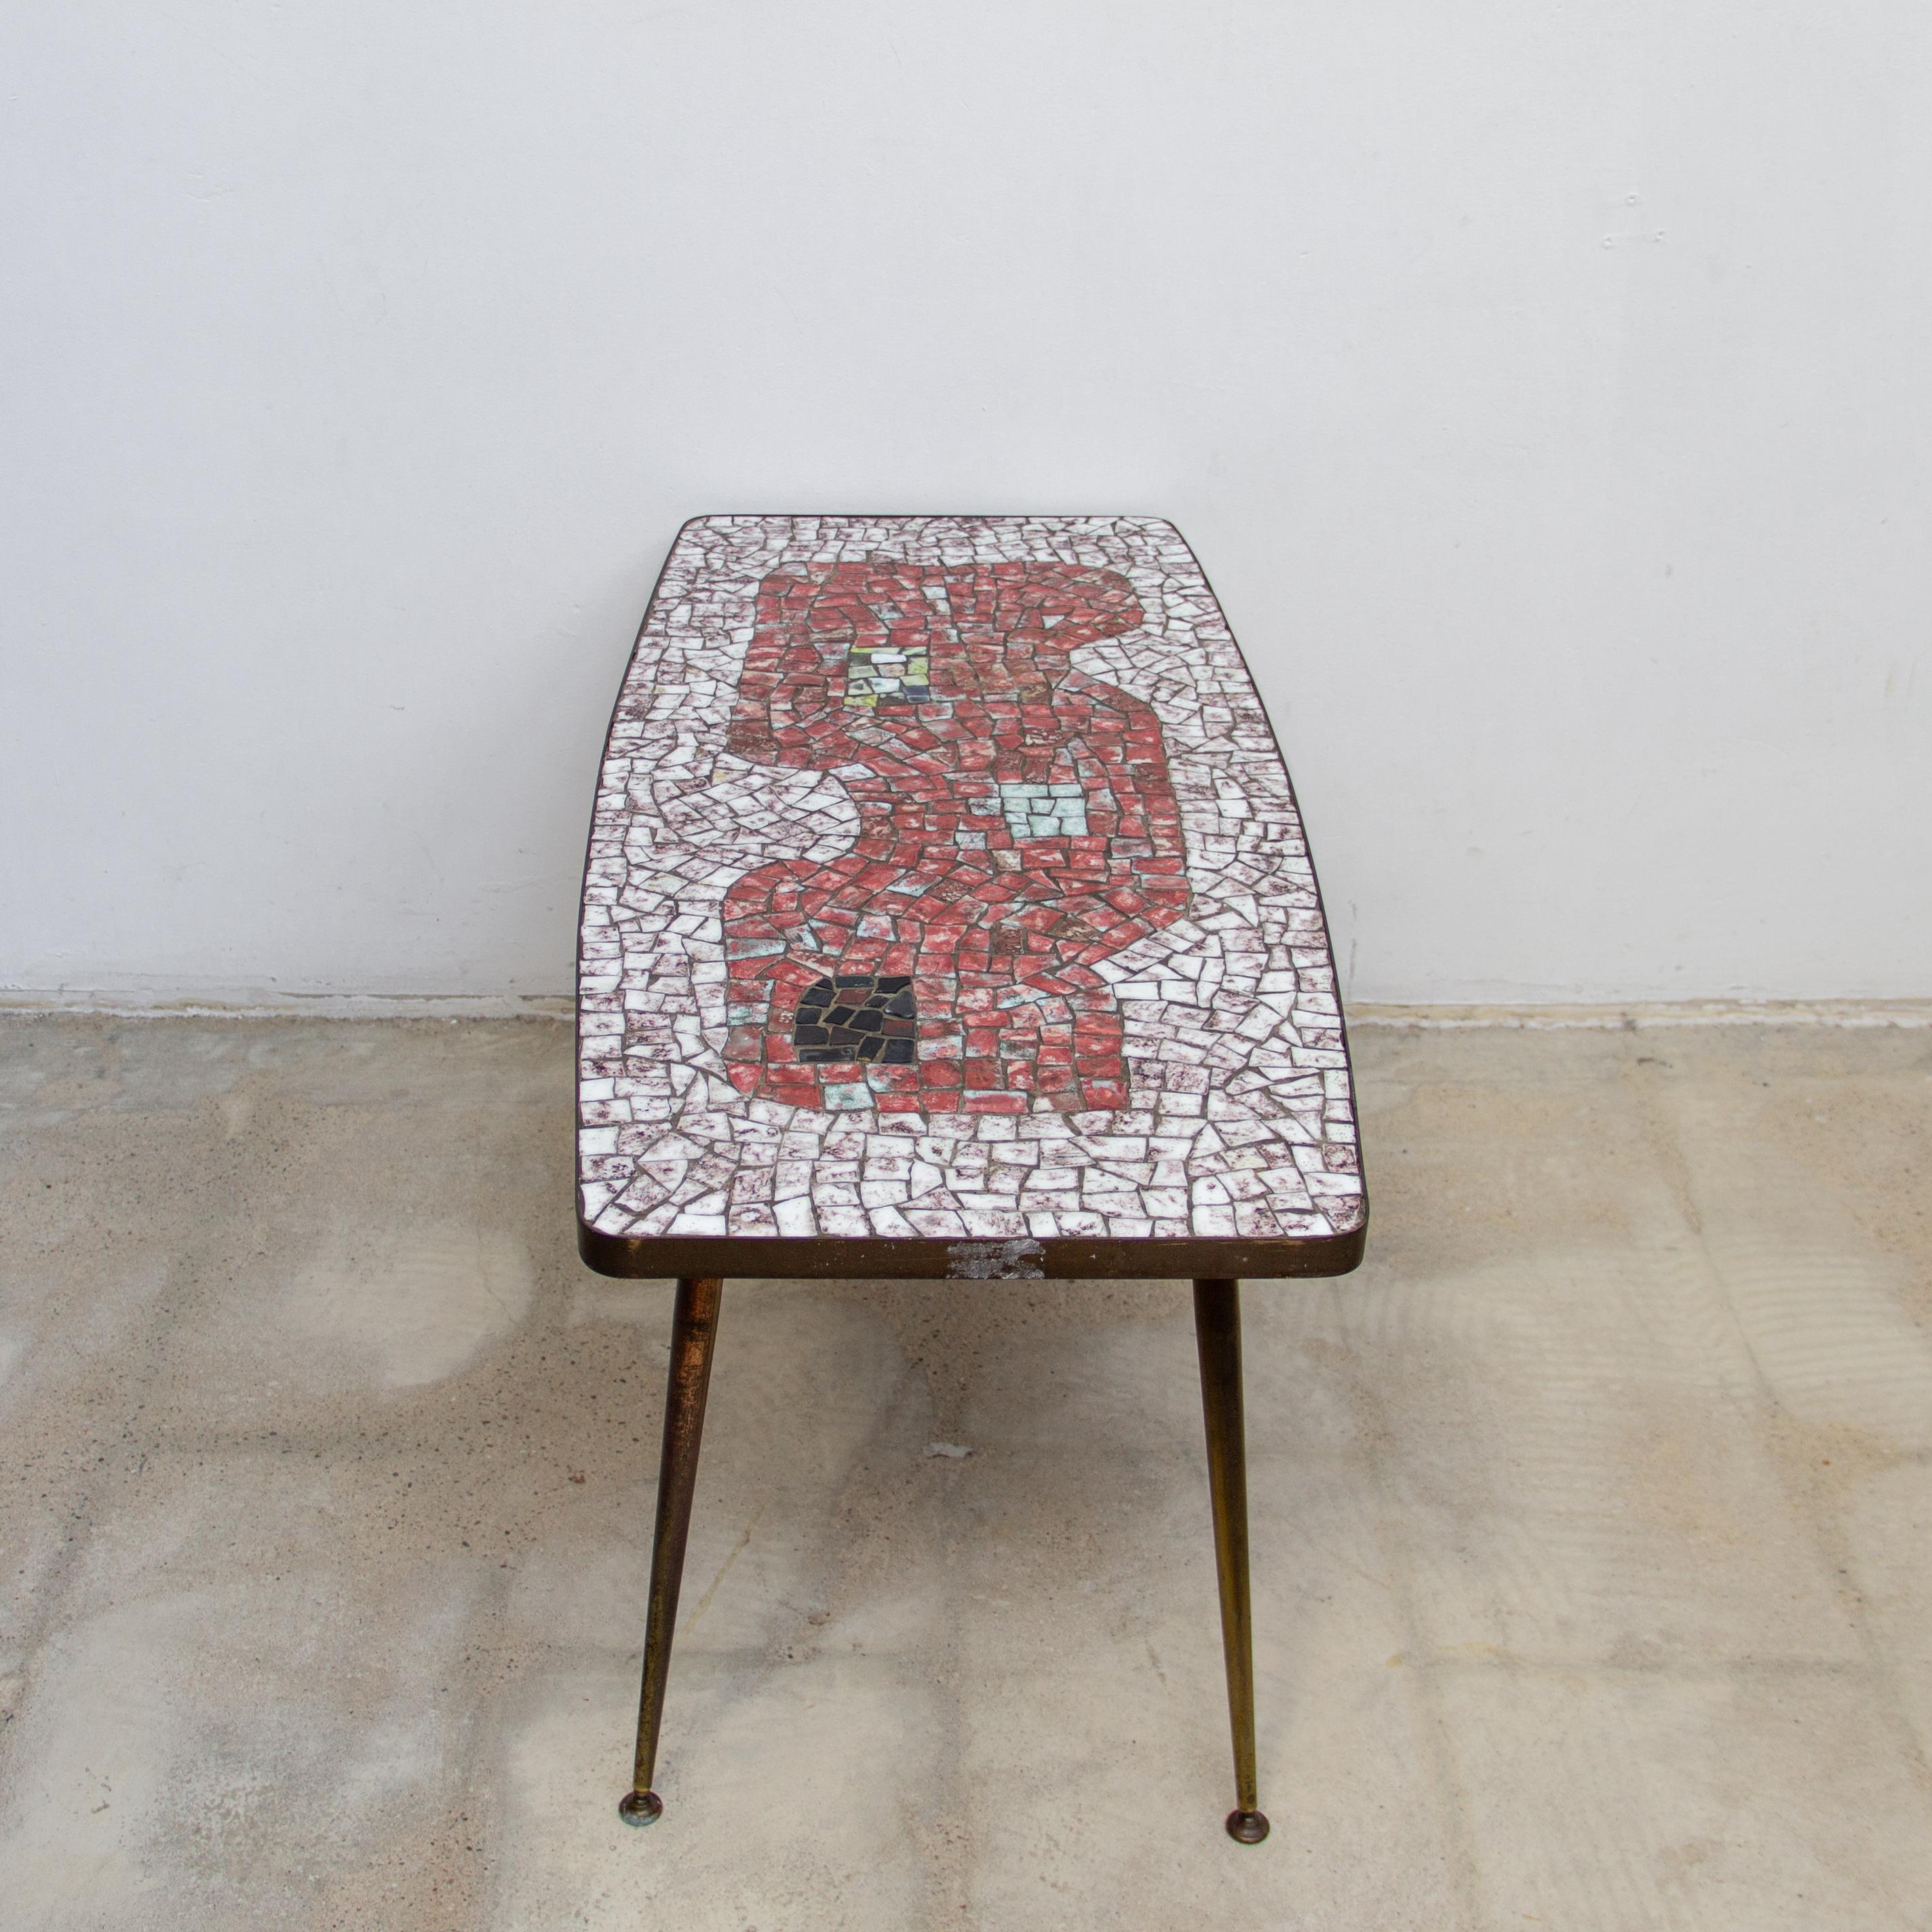 Mosaic top coffee table by the German sculptor Berthold Muller Oerlinghausen (1893-1979). The table has a rectangular shaped tabletop and a beautiful mosaic pattern of stone mosaic tiles and a brass rim and tapered brass legs. The colors of the